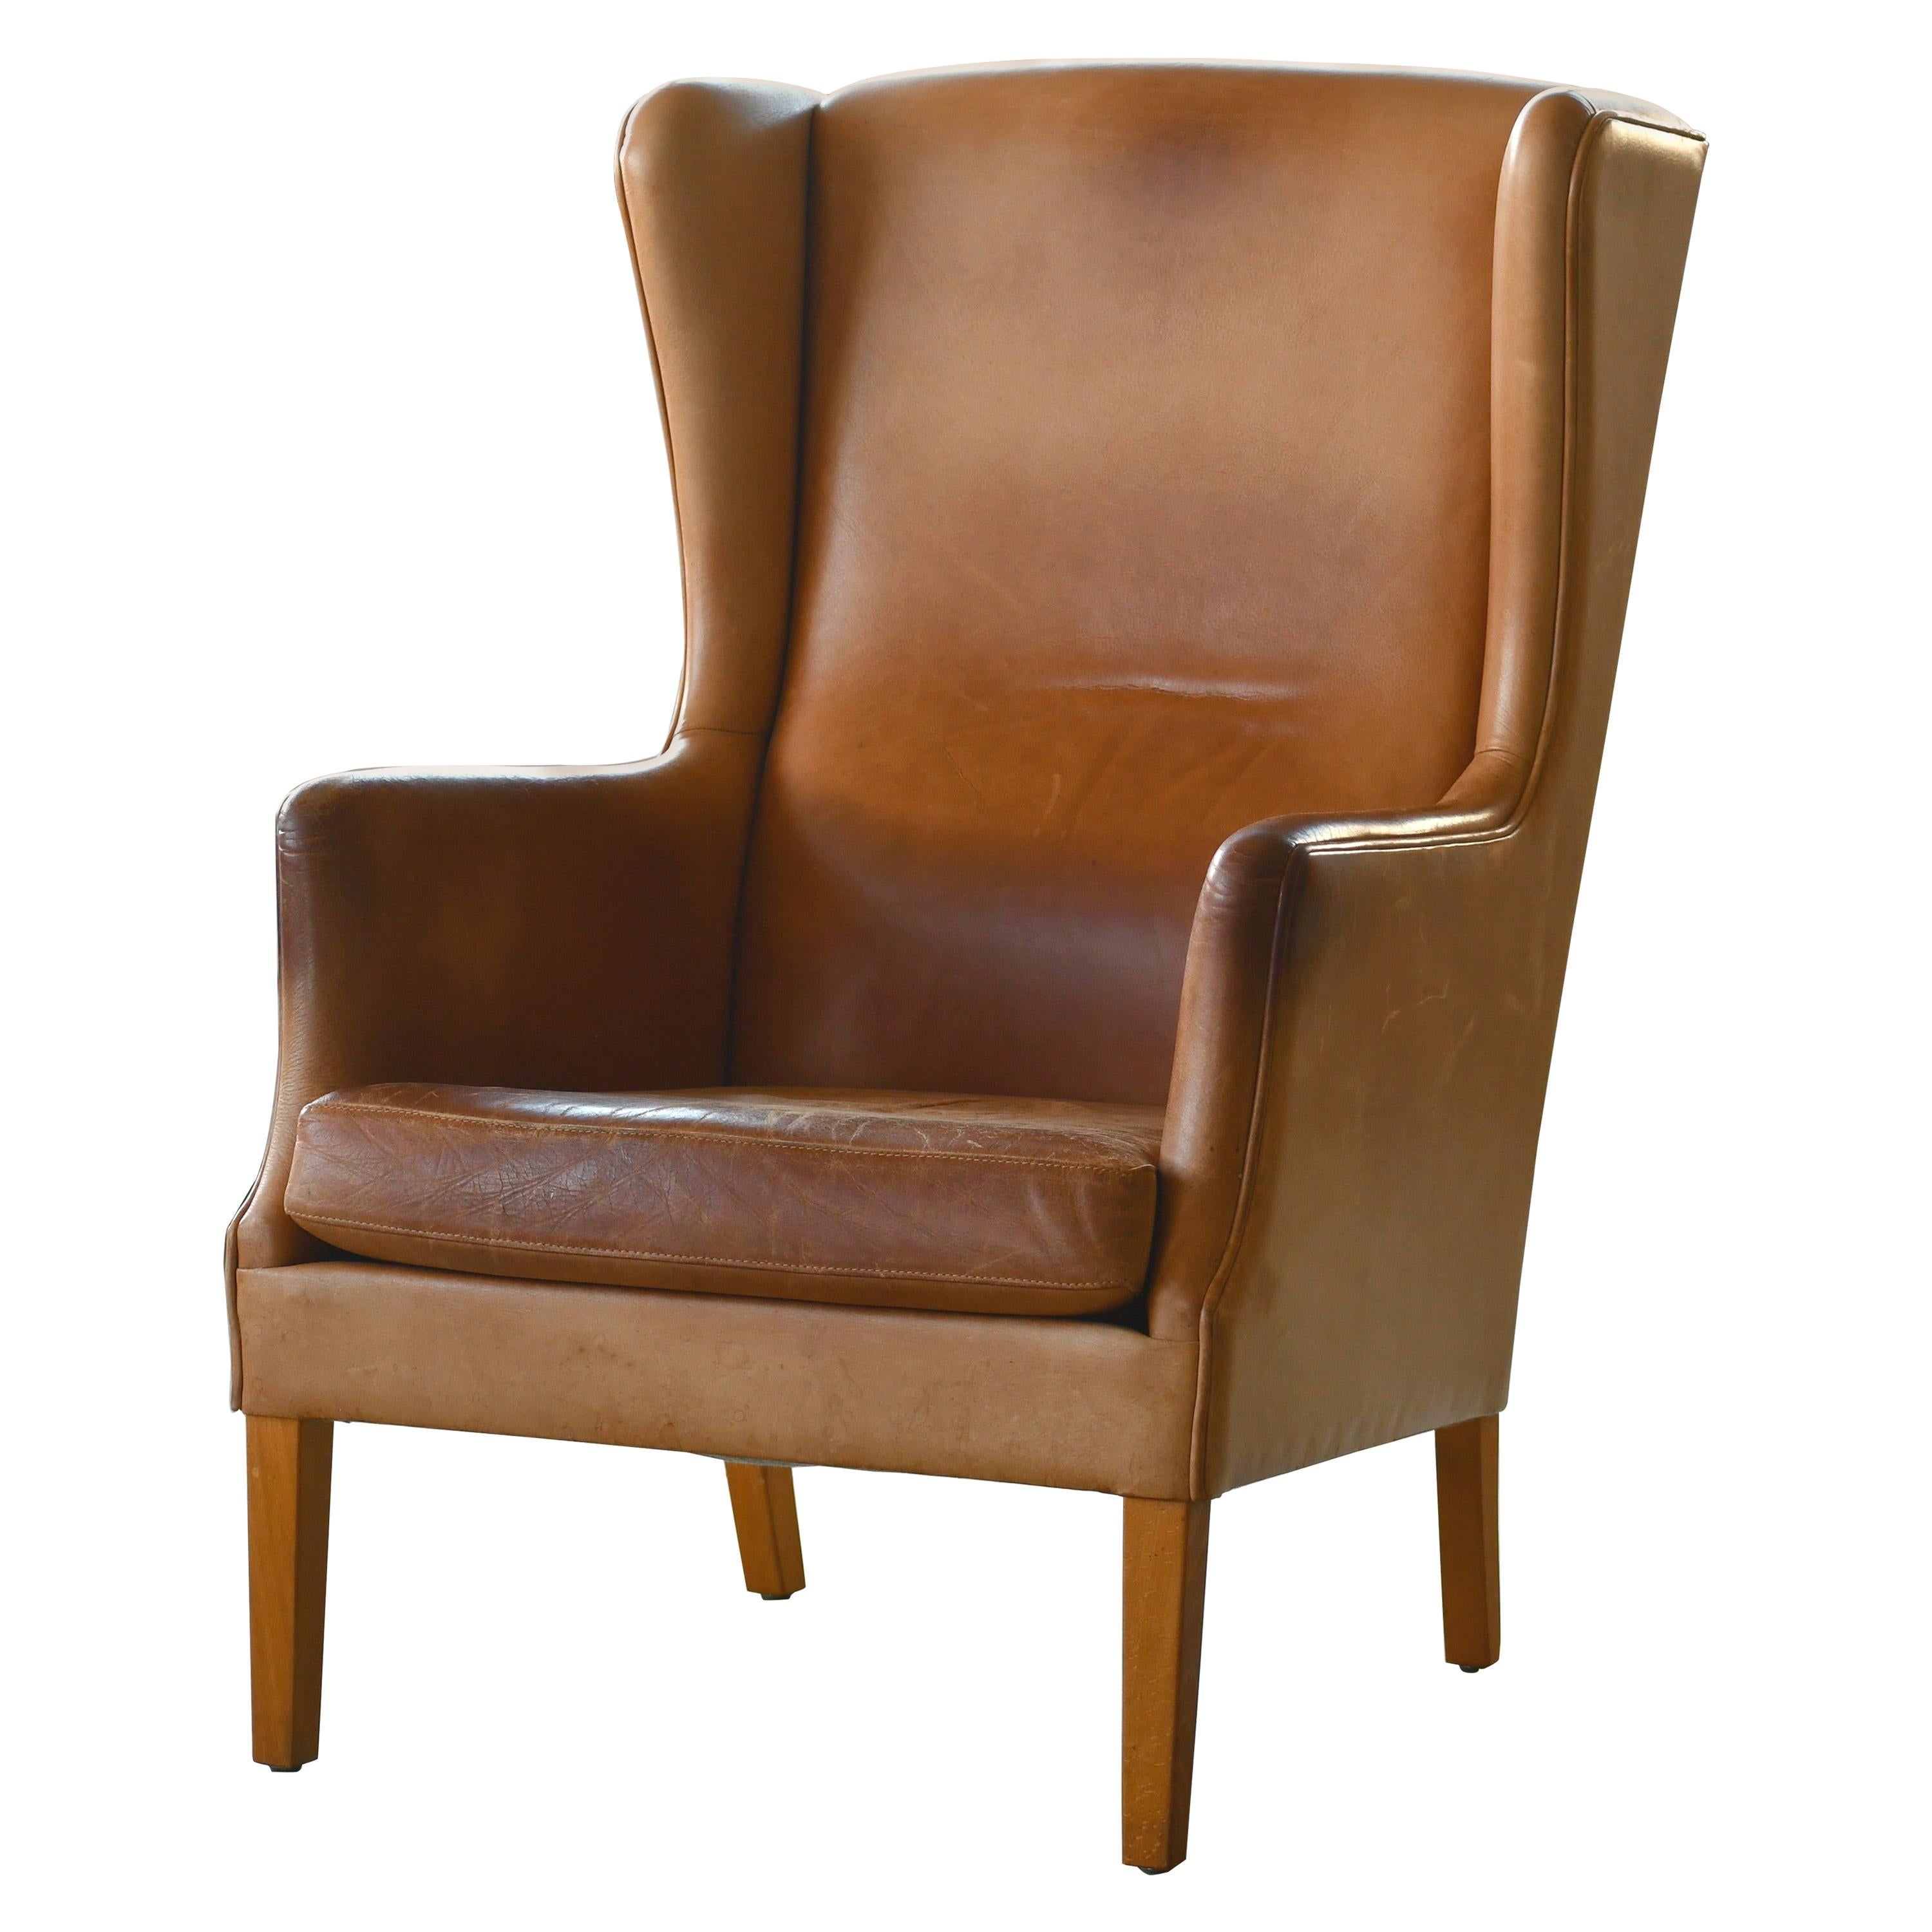 Danish Modern Kaare Klint Style Wingback Chair in Tan Leather with Patina